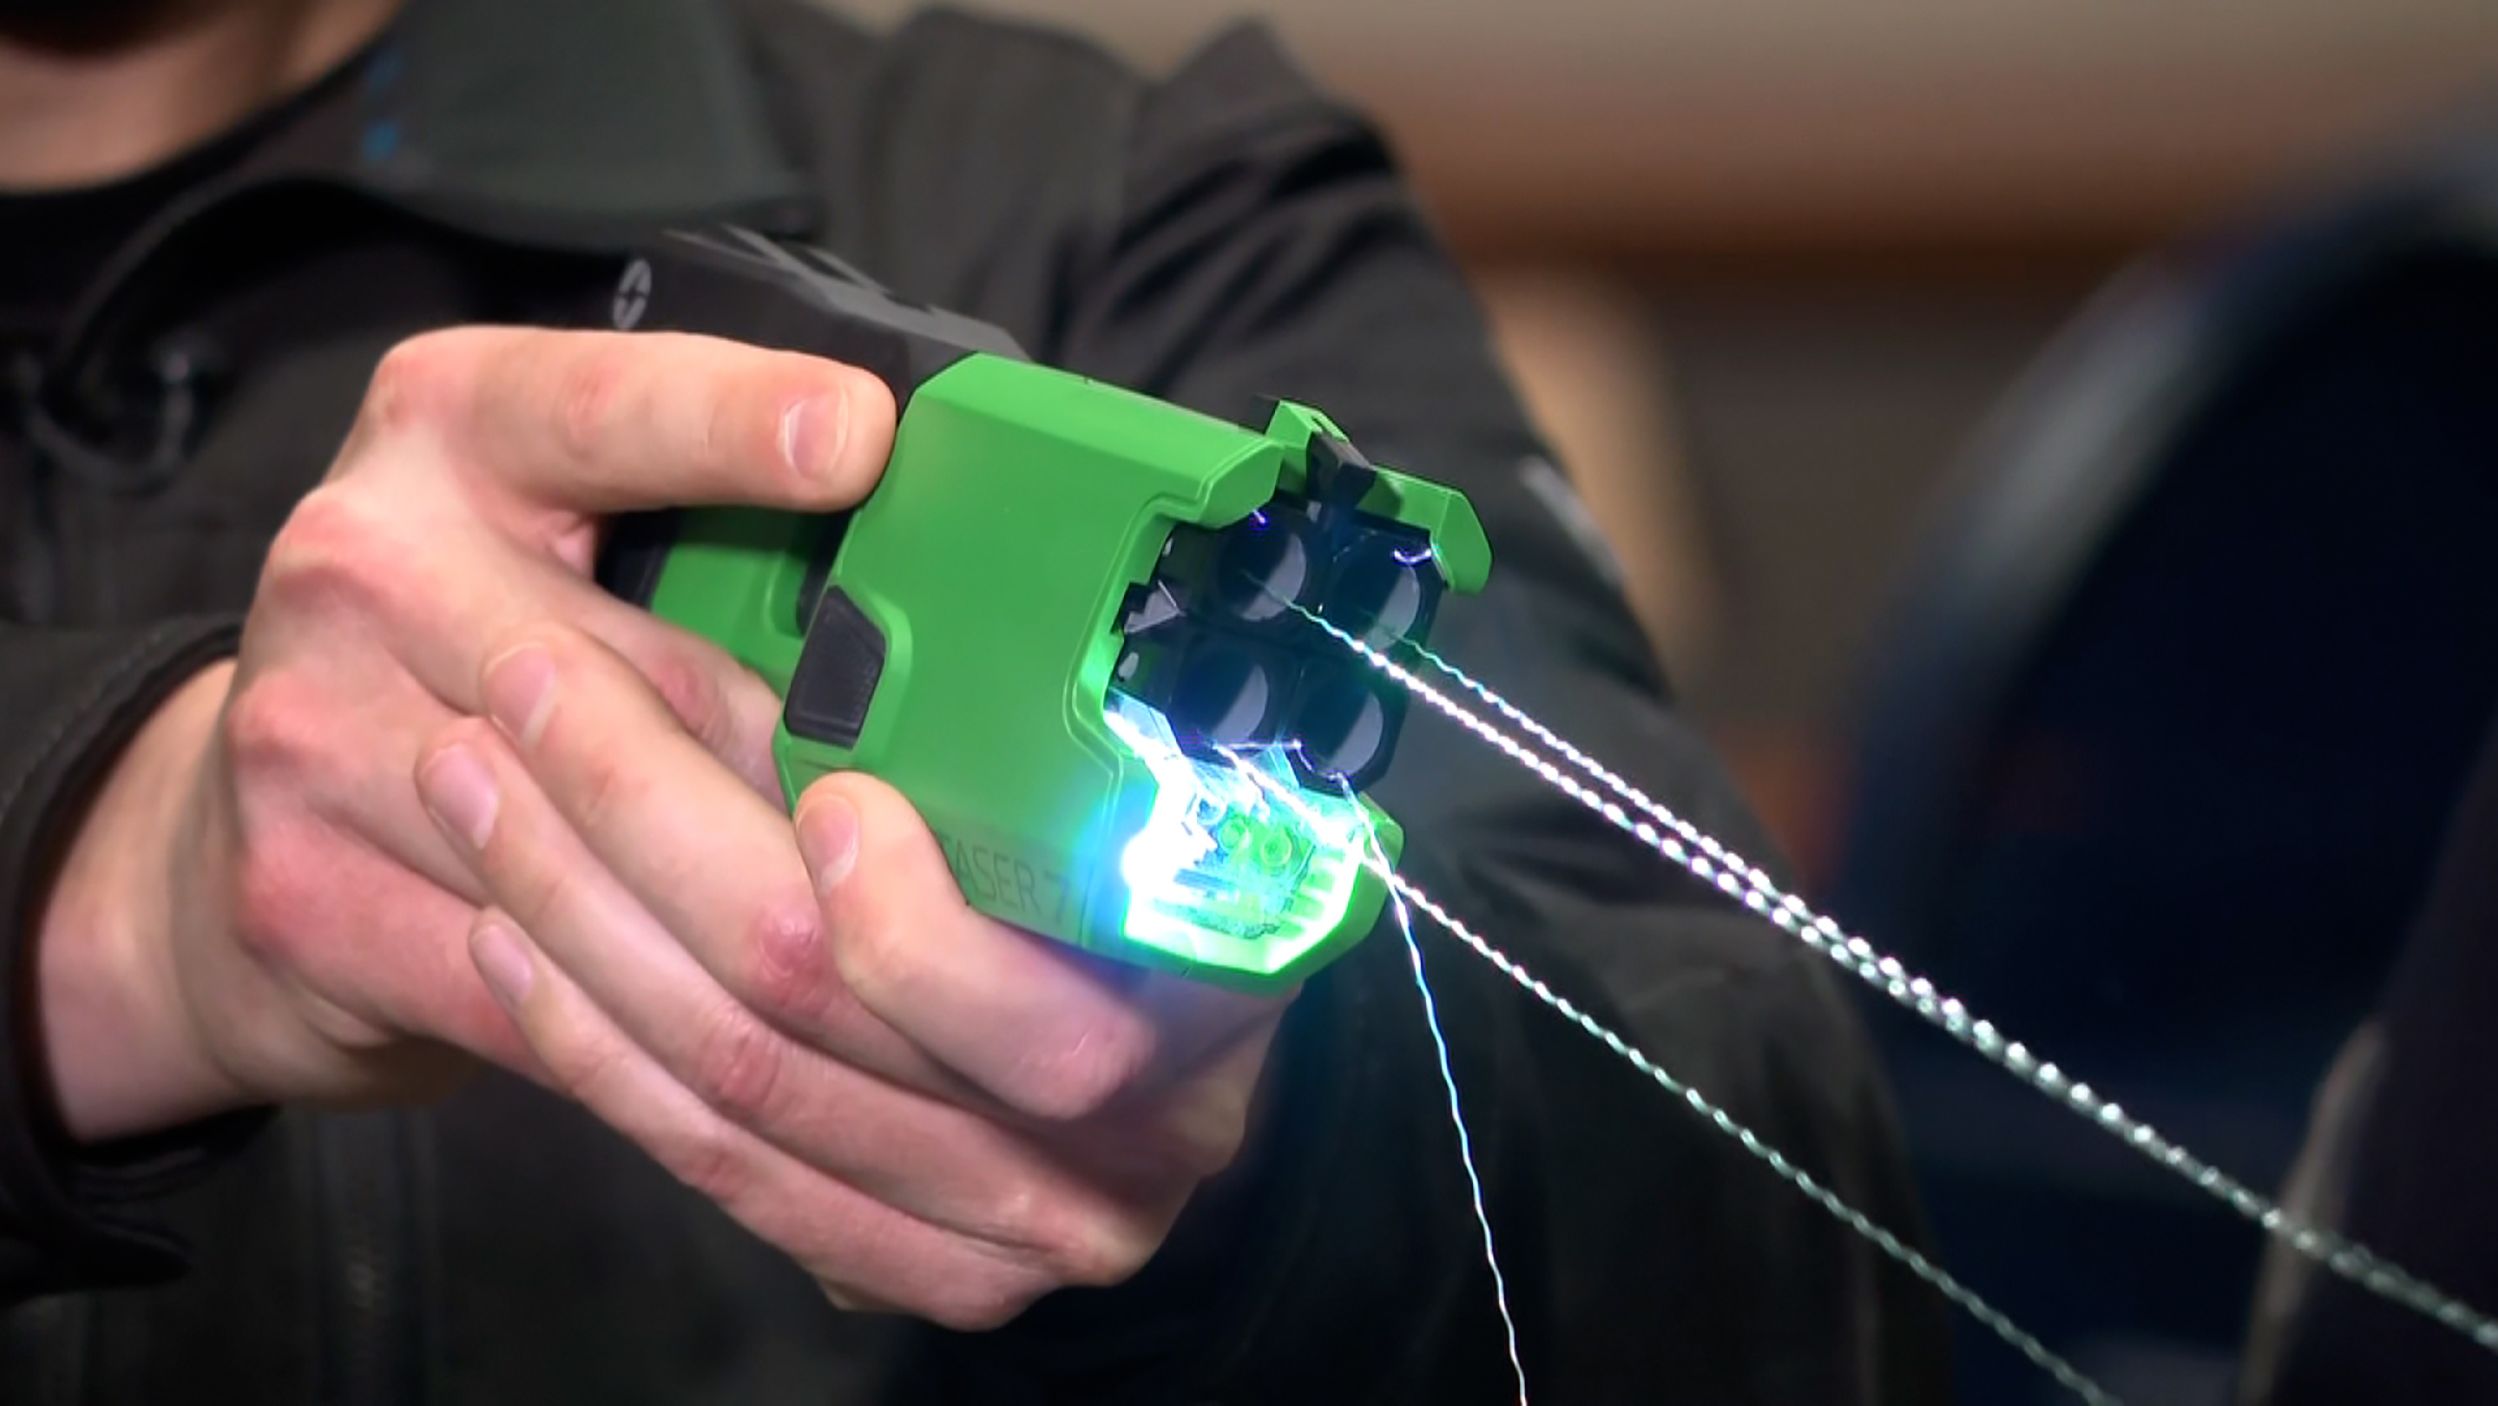 New Tasers carried by LAPD officers are made to look and feel different from service weapons.